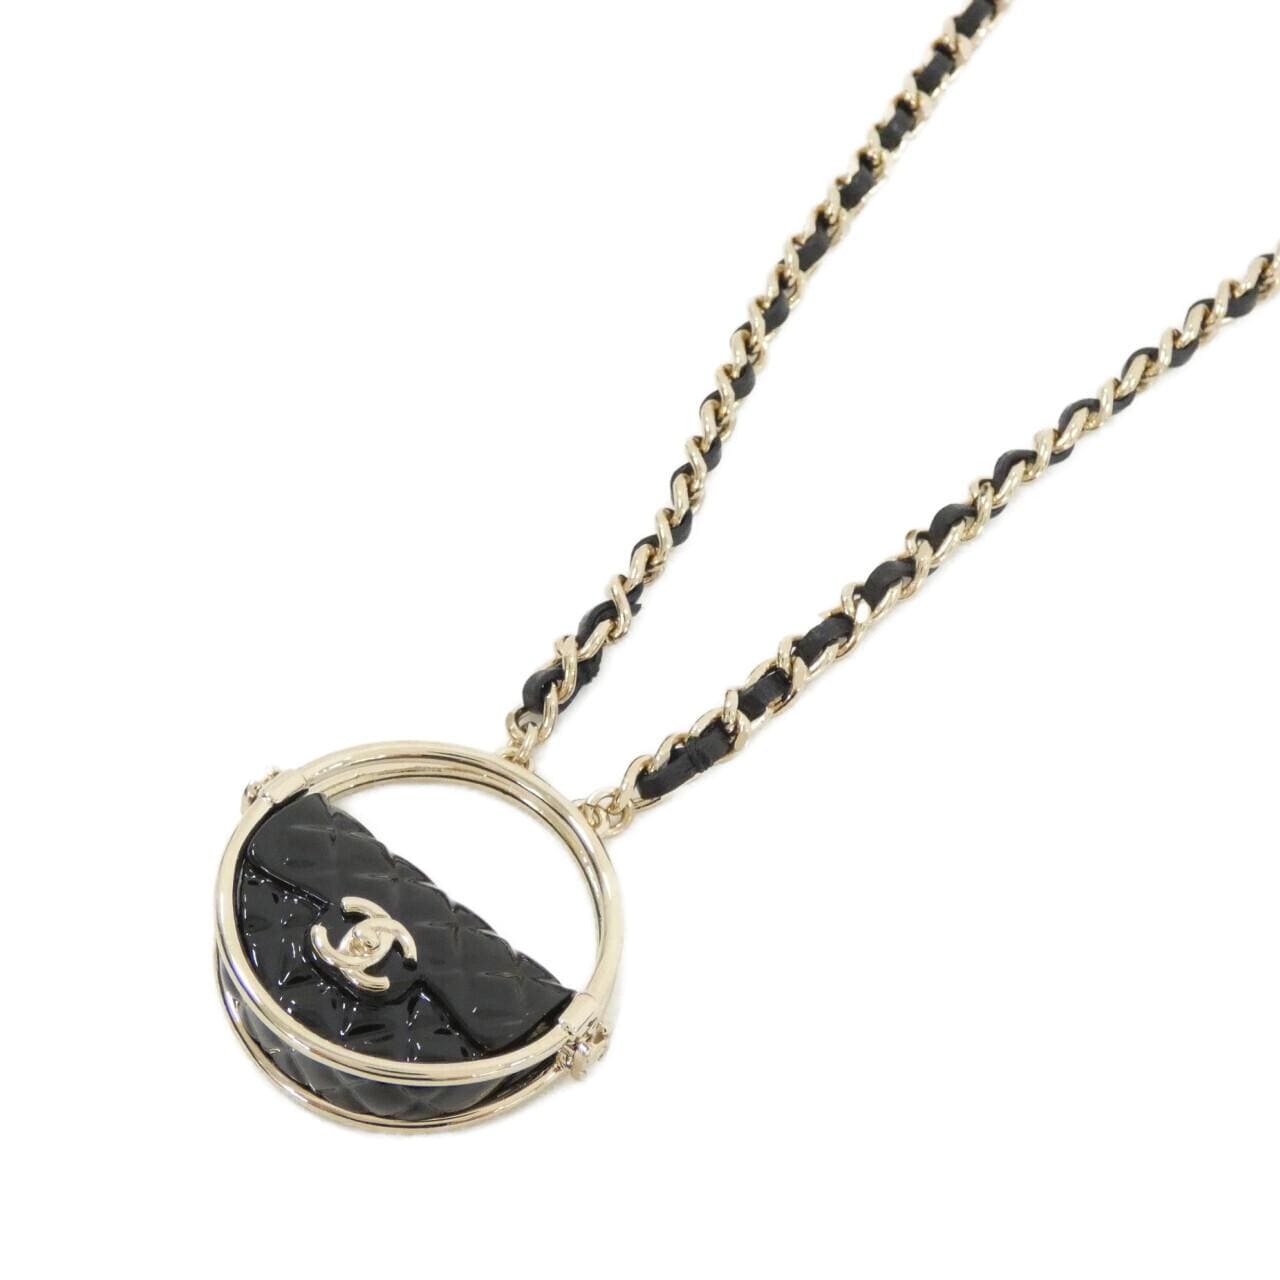 CHANEL AB9852 necklace